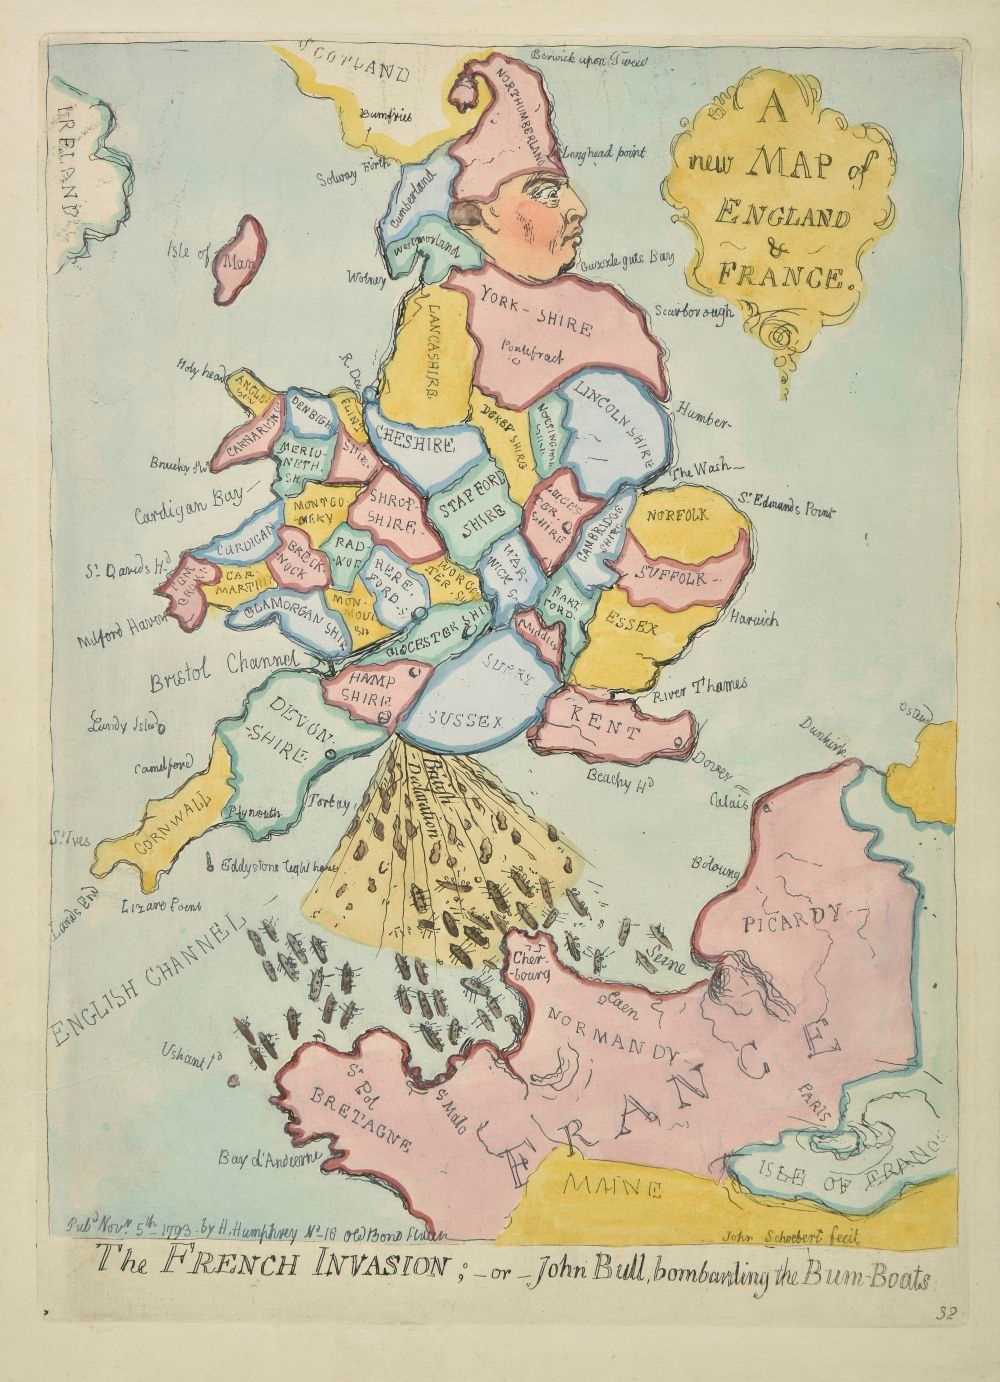 Lot 96 - Gillray (James). A New Map of England & France. The French Invasion..., 1793 - 1851